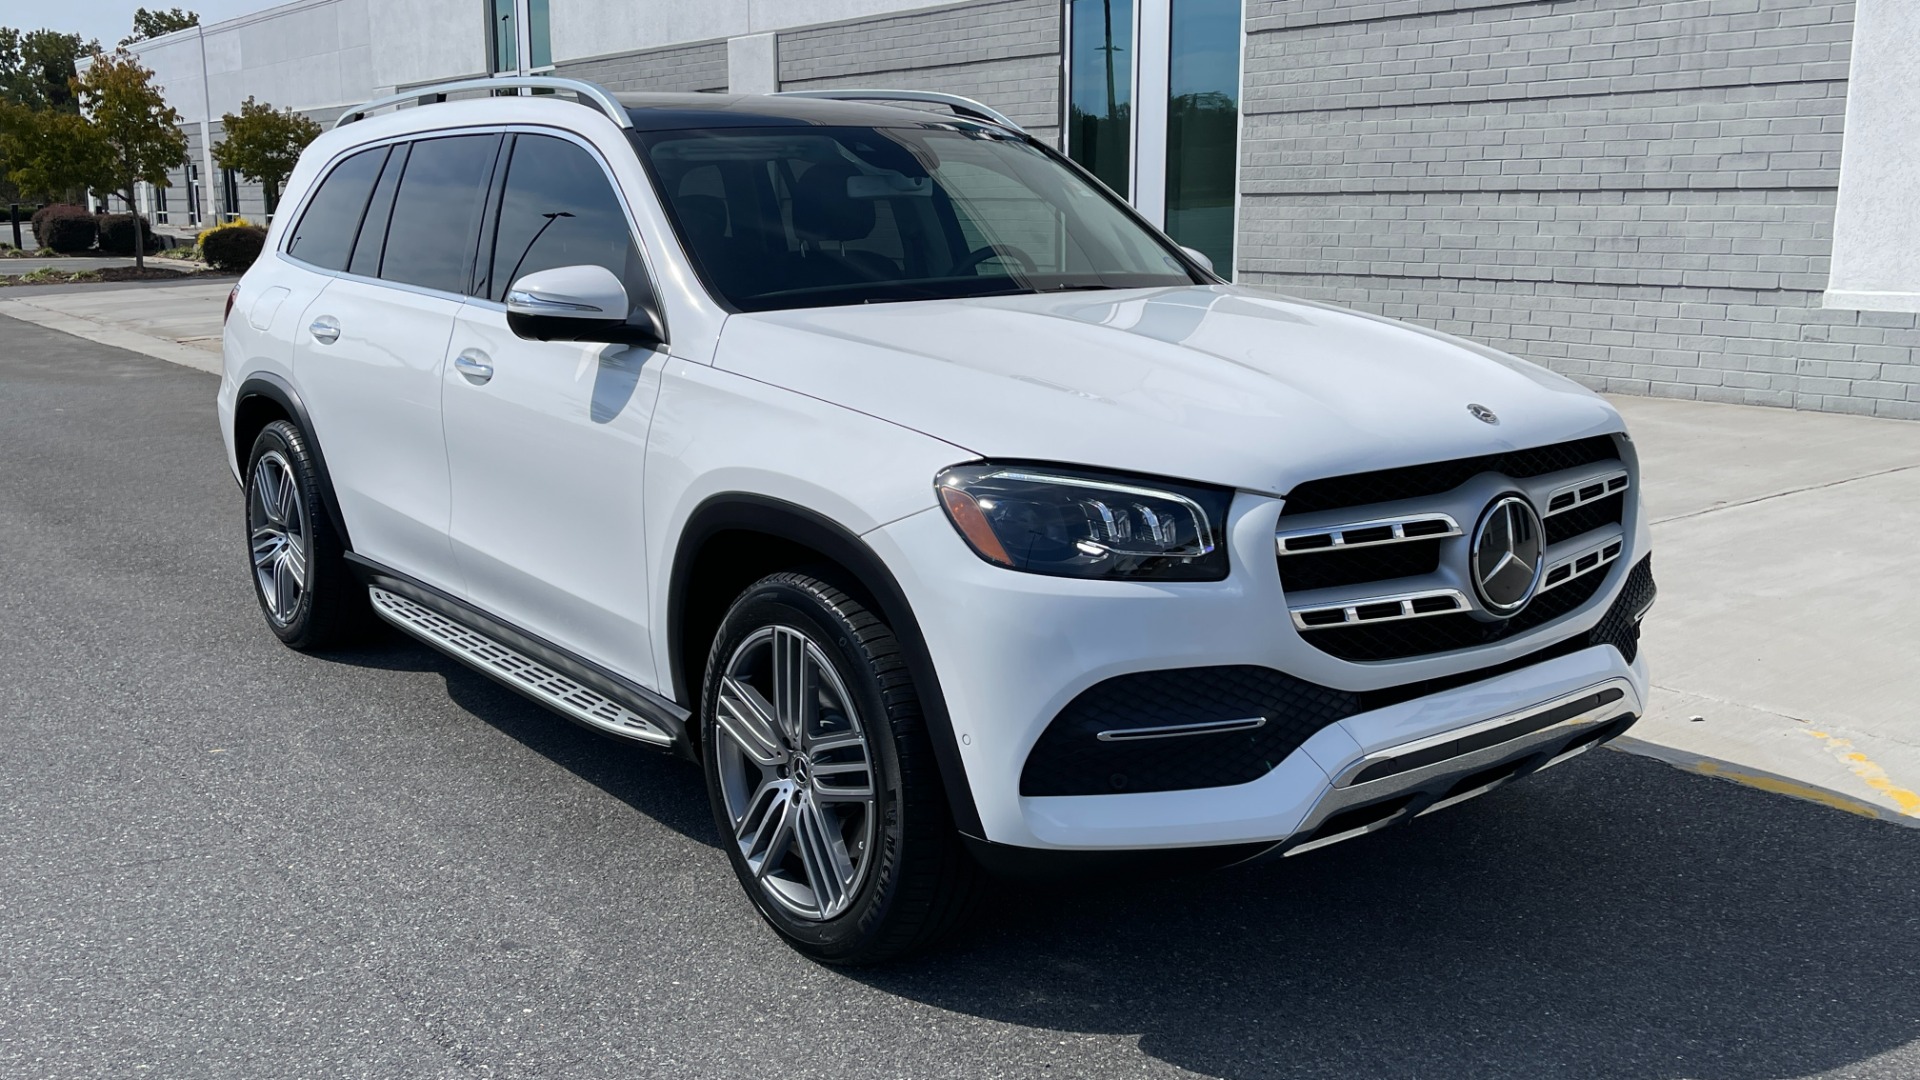 Used 2020 Mercedes-Benz GLS GLS 450 / 3 ROW / CAPTAINS CHAIRS / MASSAGE / NAV / HEADS UP DISPLAY for sale $69,999 at Formula Imports in Charlotte NC 28227 6